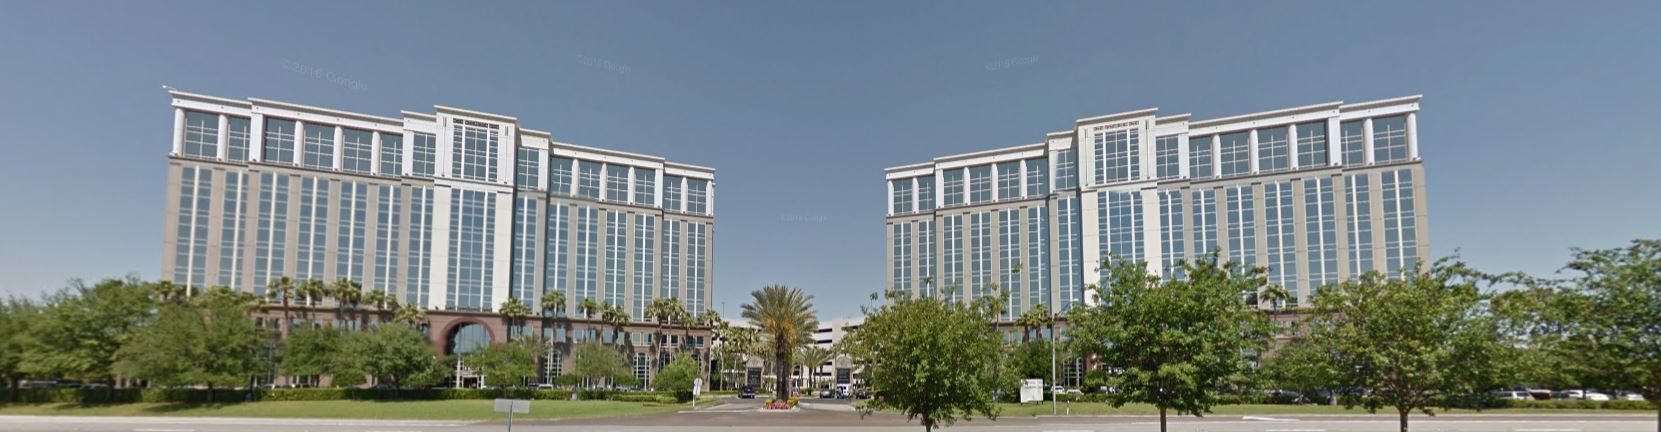 google street view of two office buildings at tampa, florida conrporate center